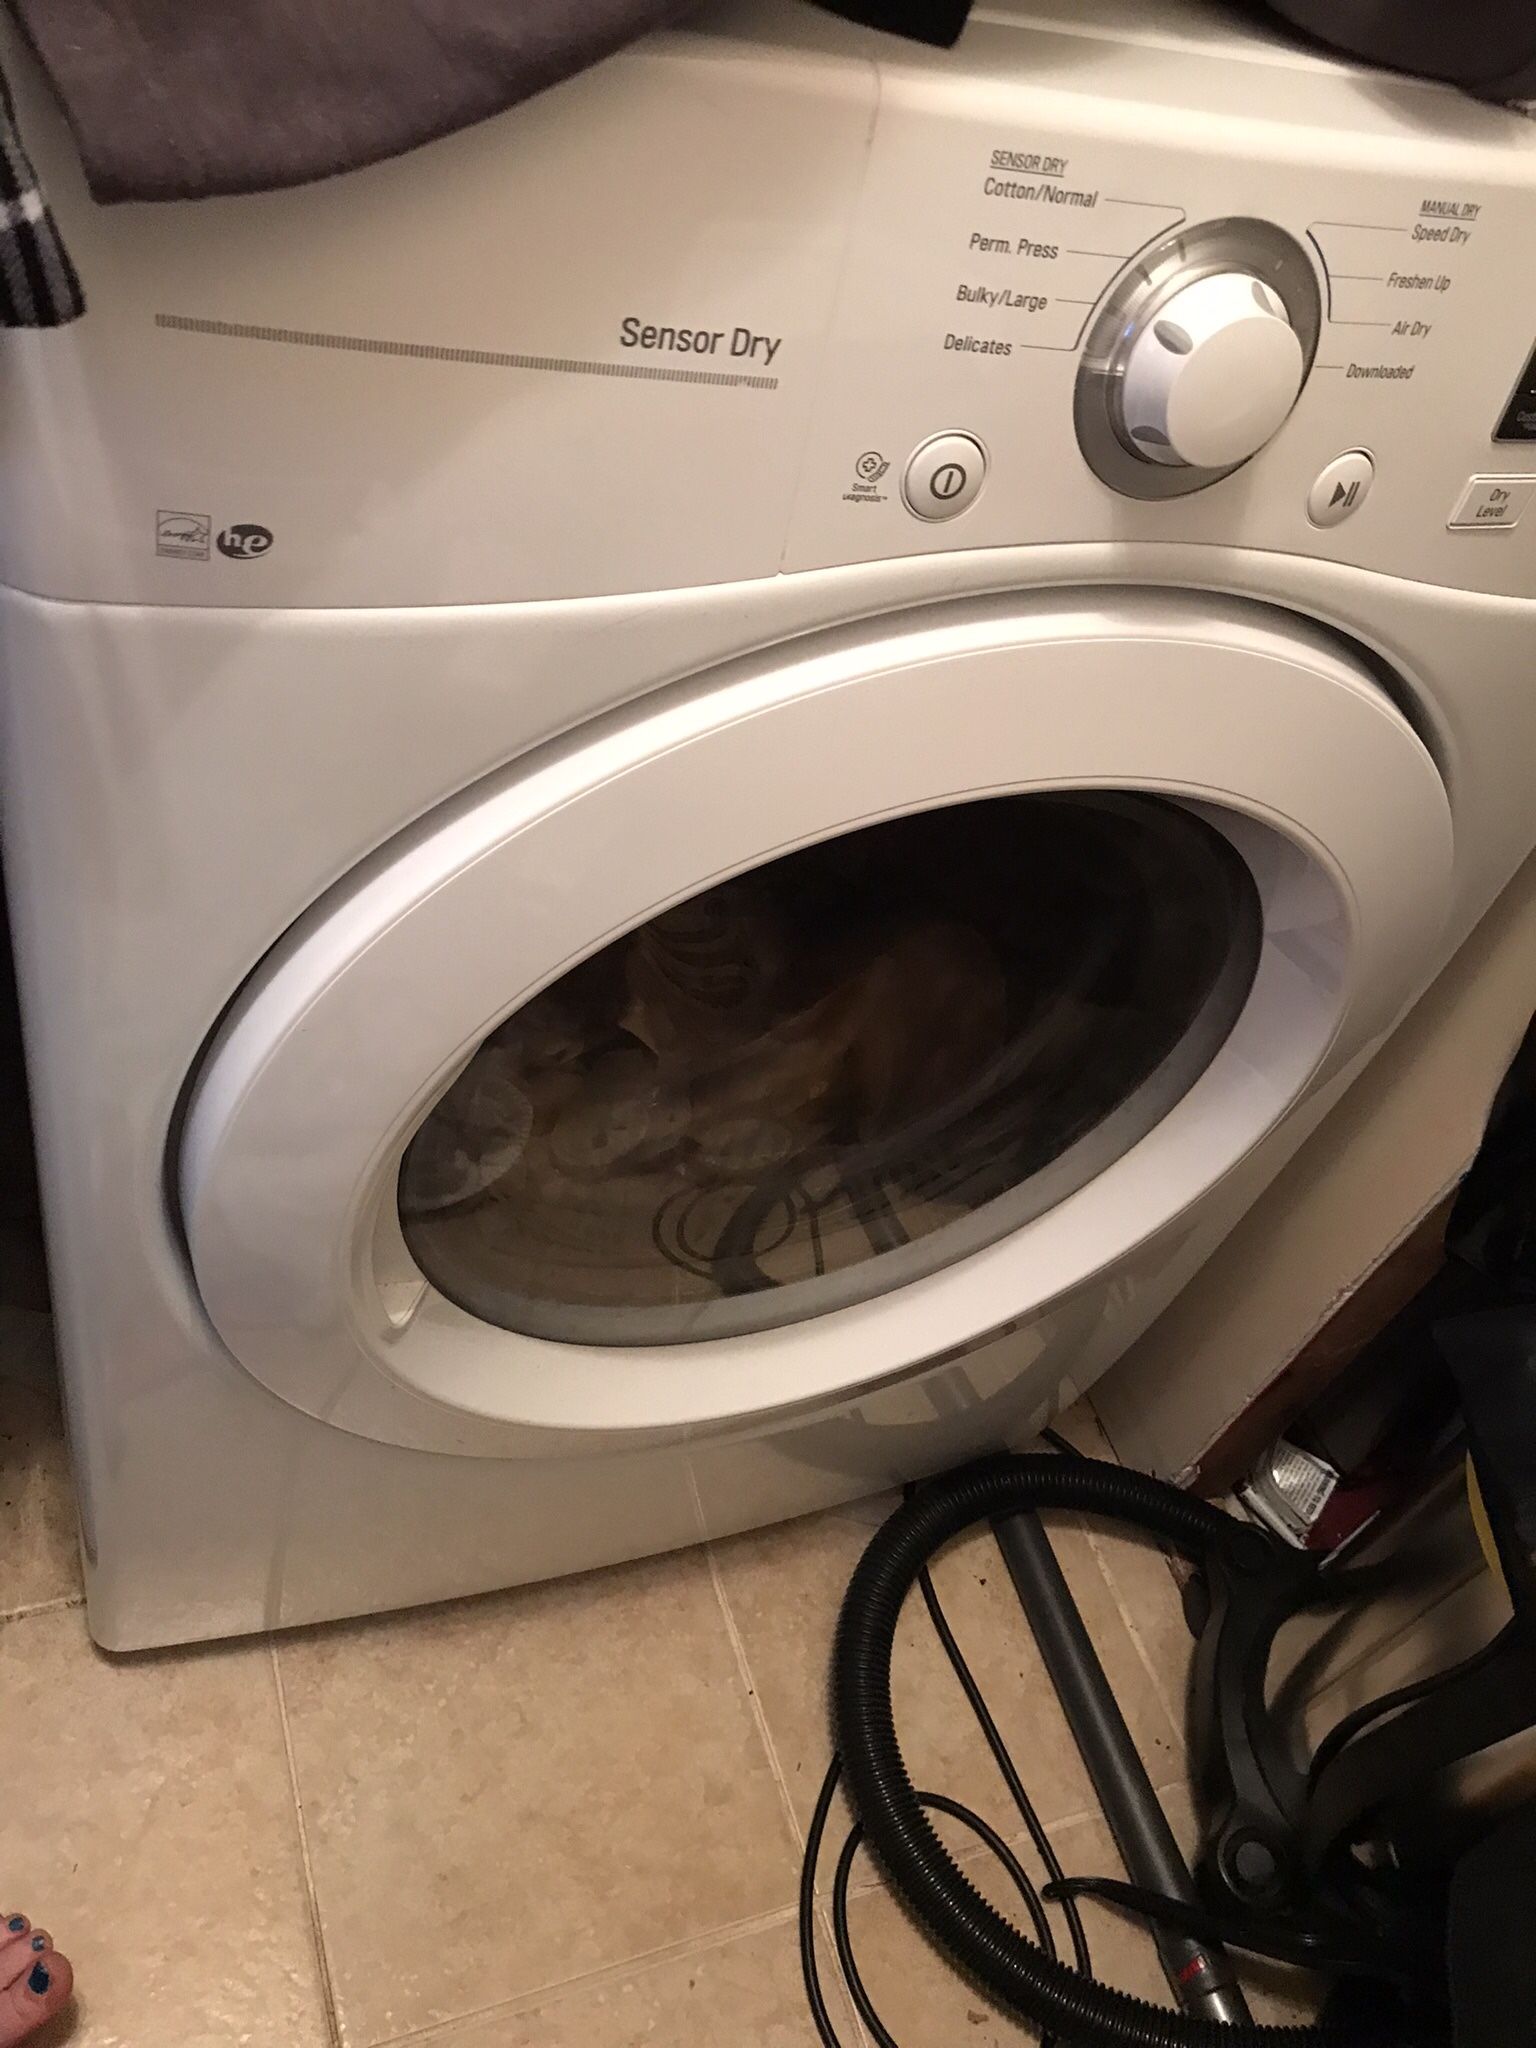 LG Washer And Dryer